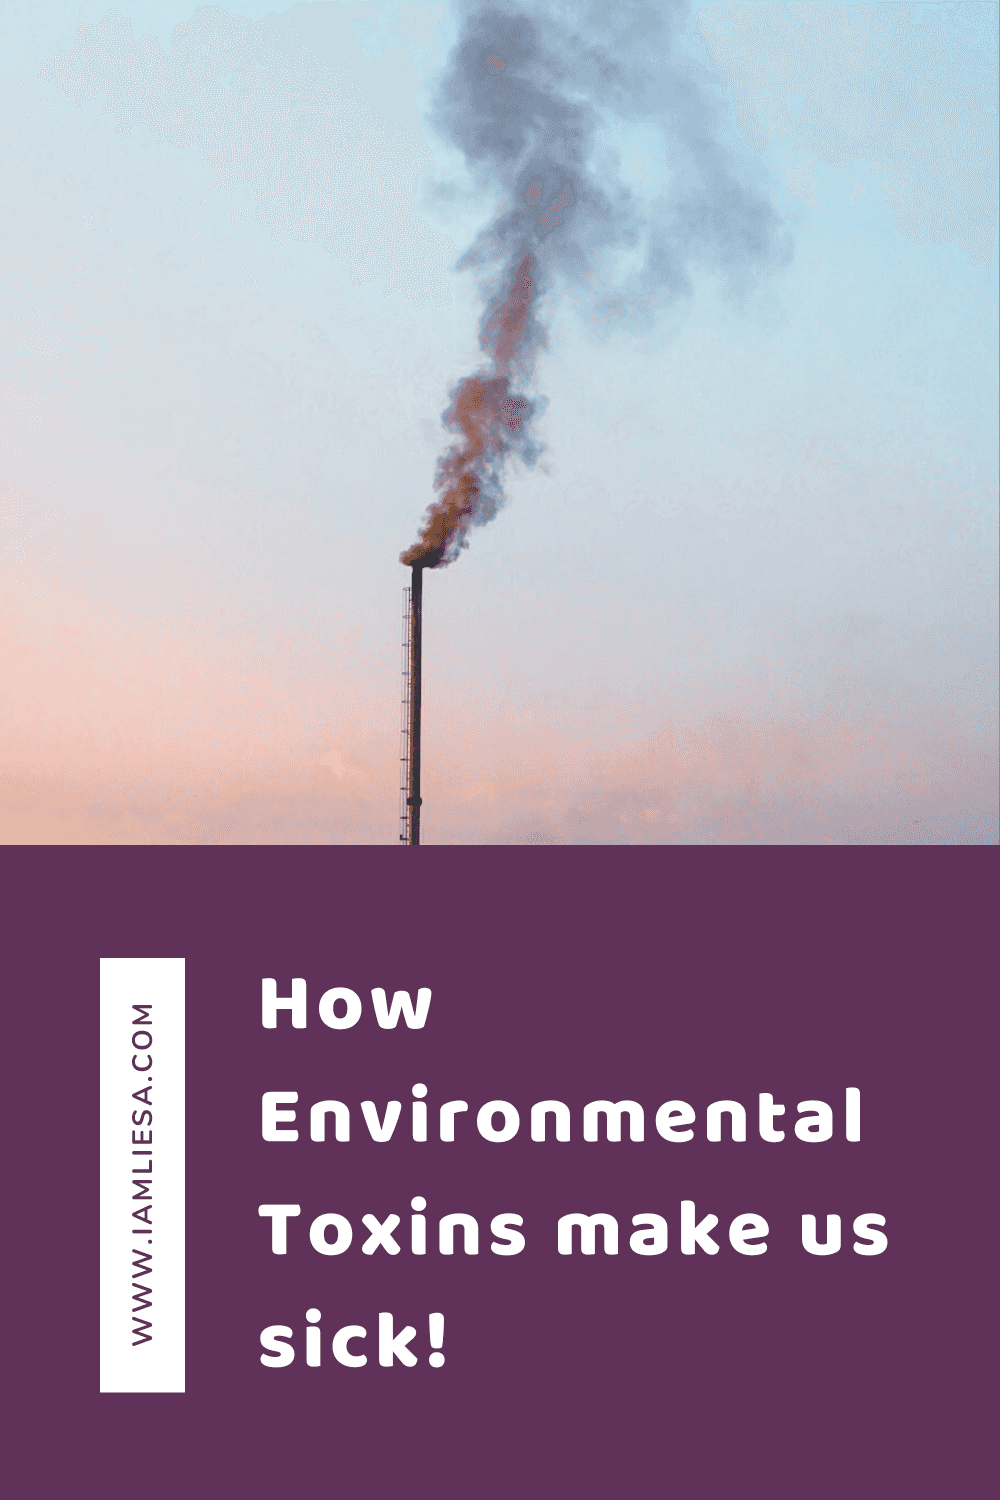 Environmental toxins are all around us and they are a leading cause of chronic inflammation, a process that may cause severe disease. If you know what environmental toxins are and what to look out for, you are able to reduce being exposed to them and thus reduce the risk of getting sick.